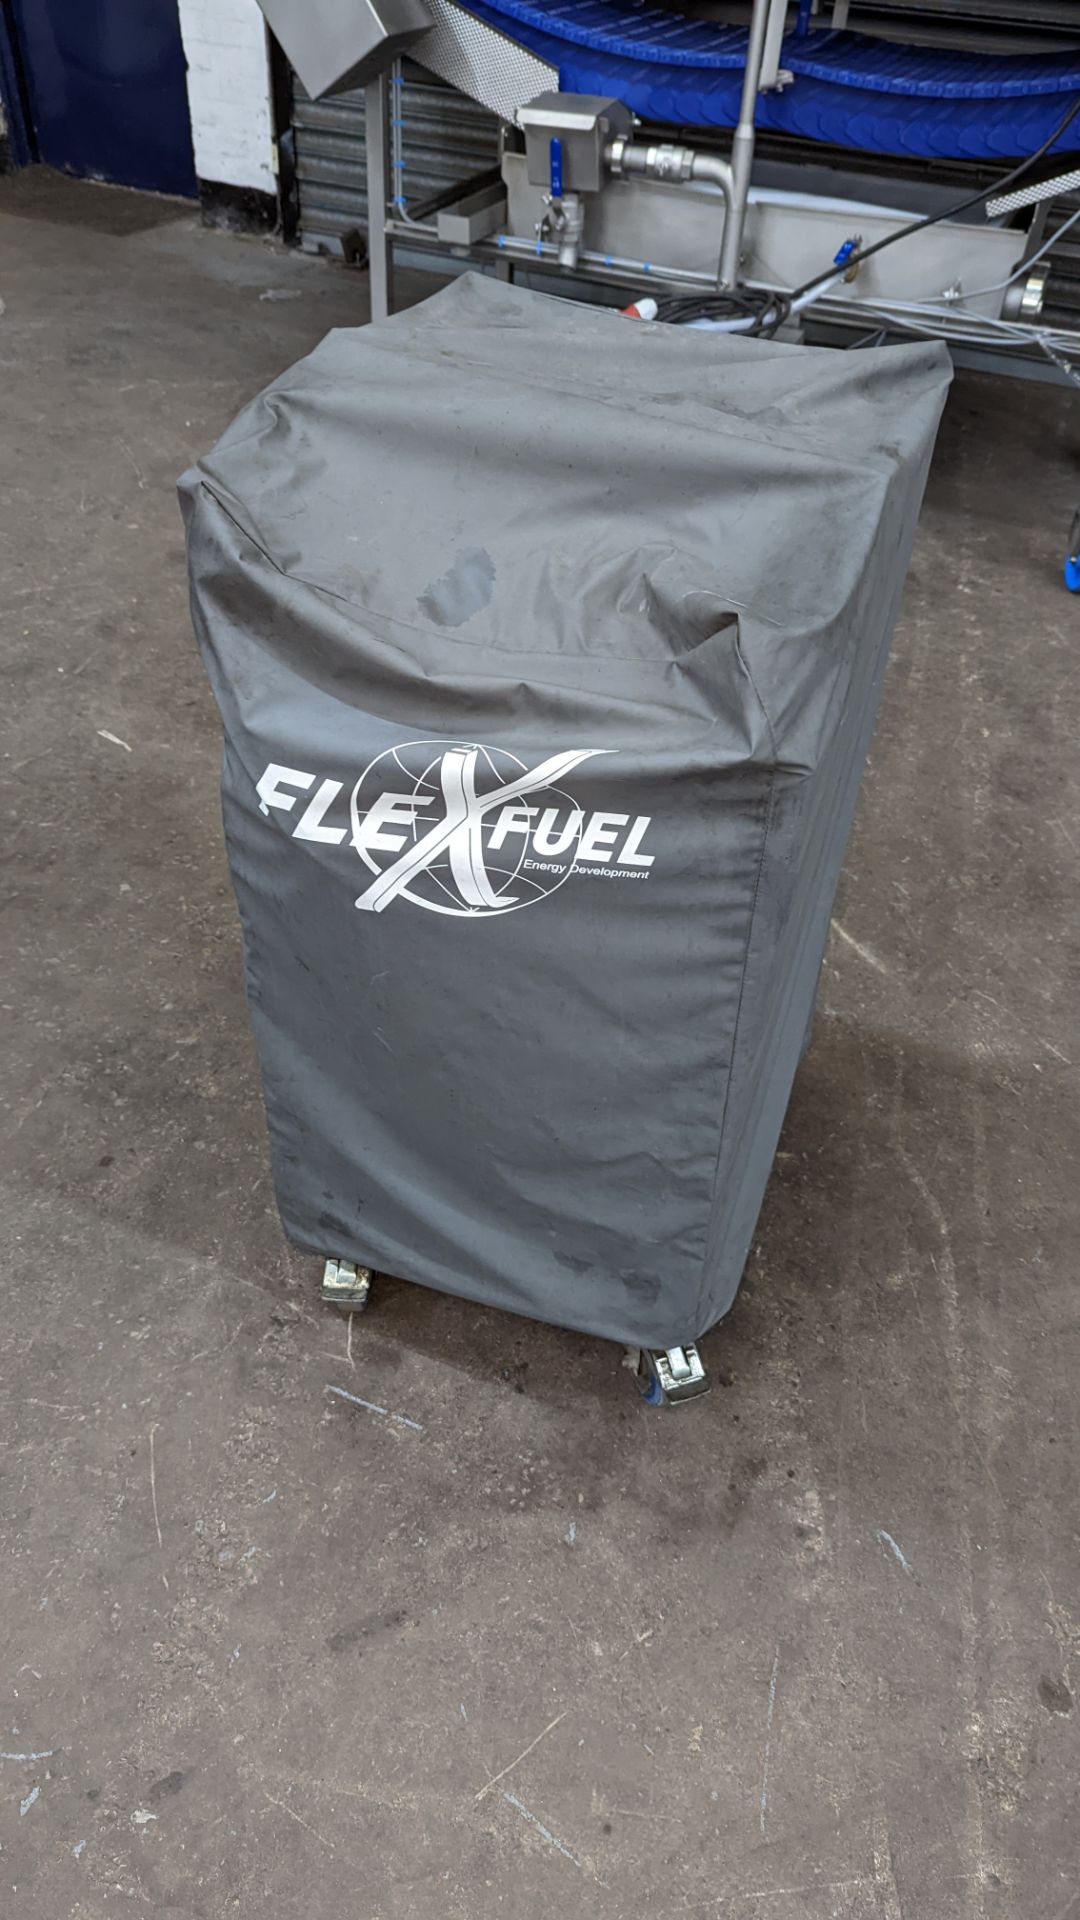 Flex Fuel Hy-Carbon EGR Pilot 1000S engine cleaning machine including cover. Purchased new in 2019 - Image 12 of 19